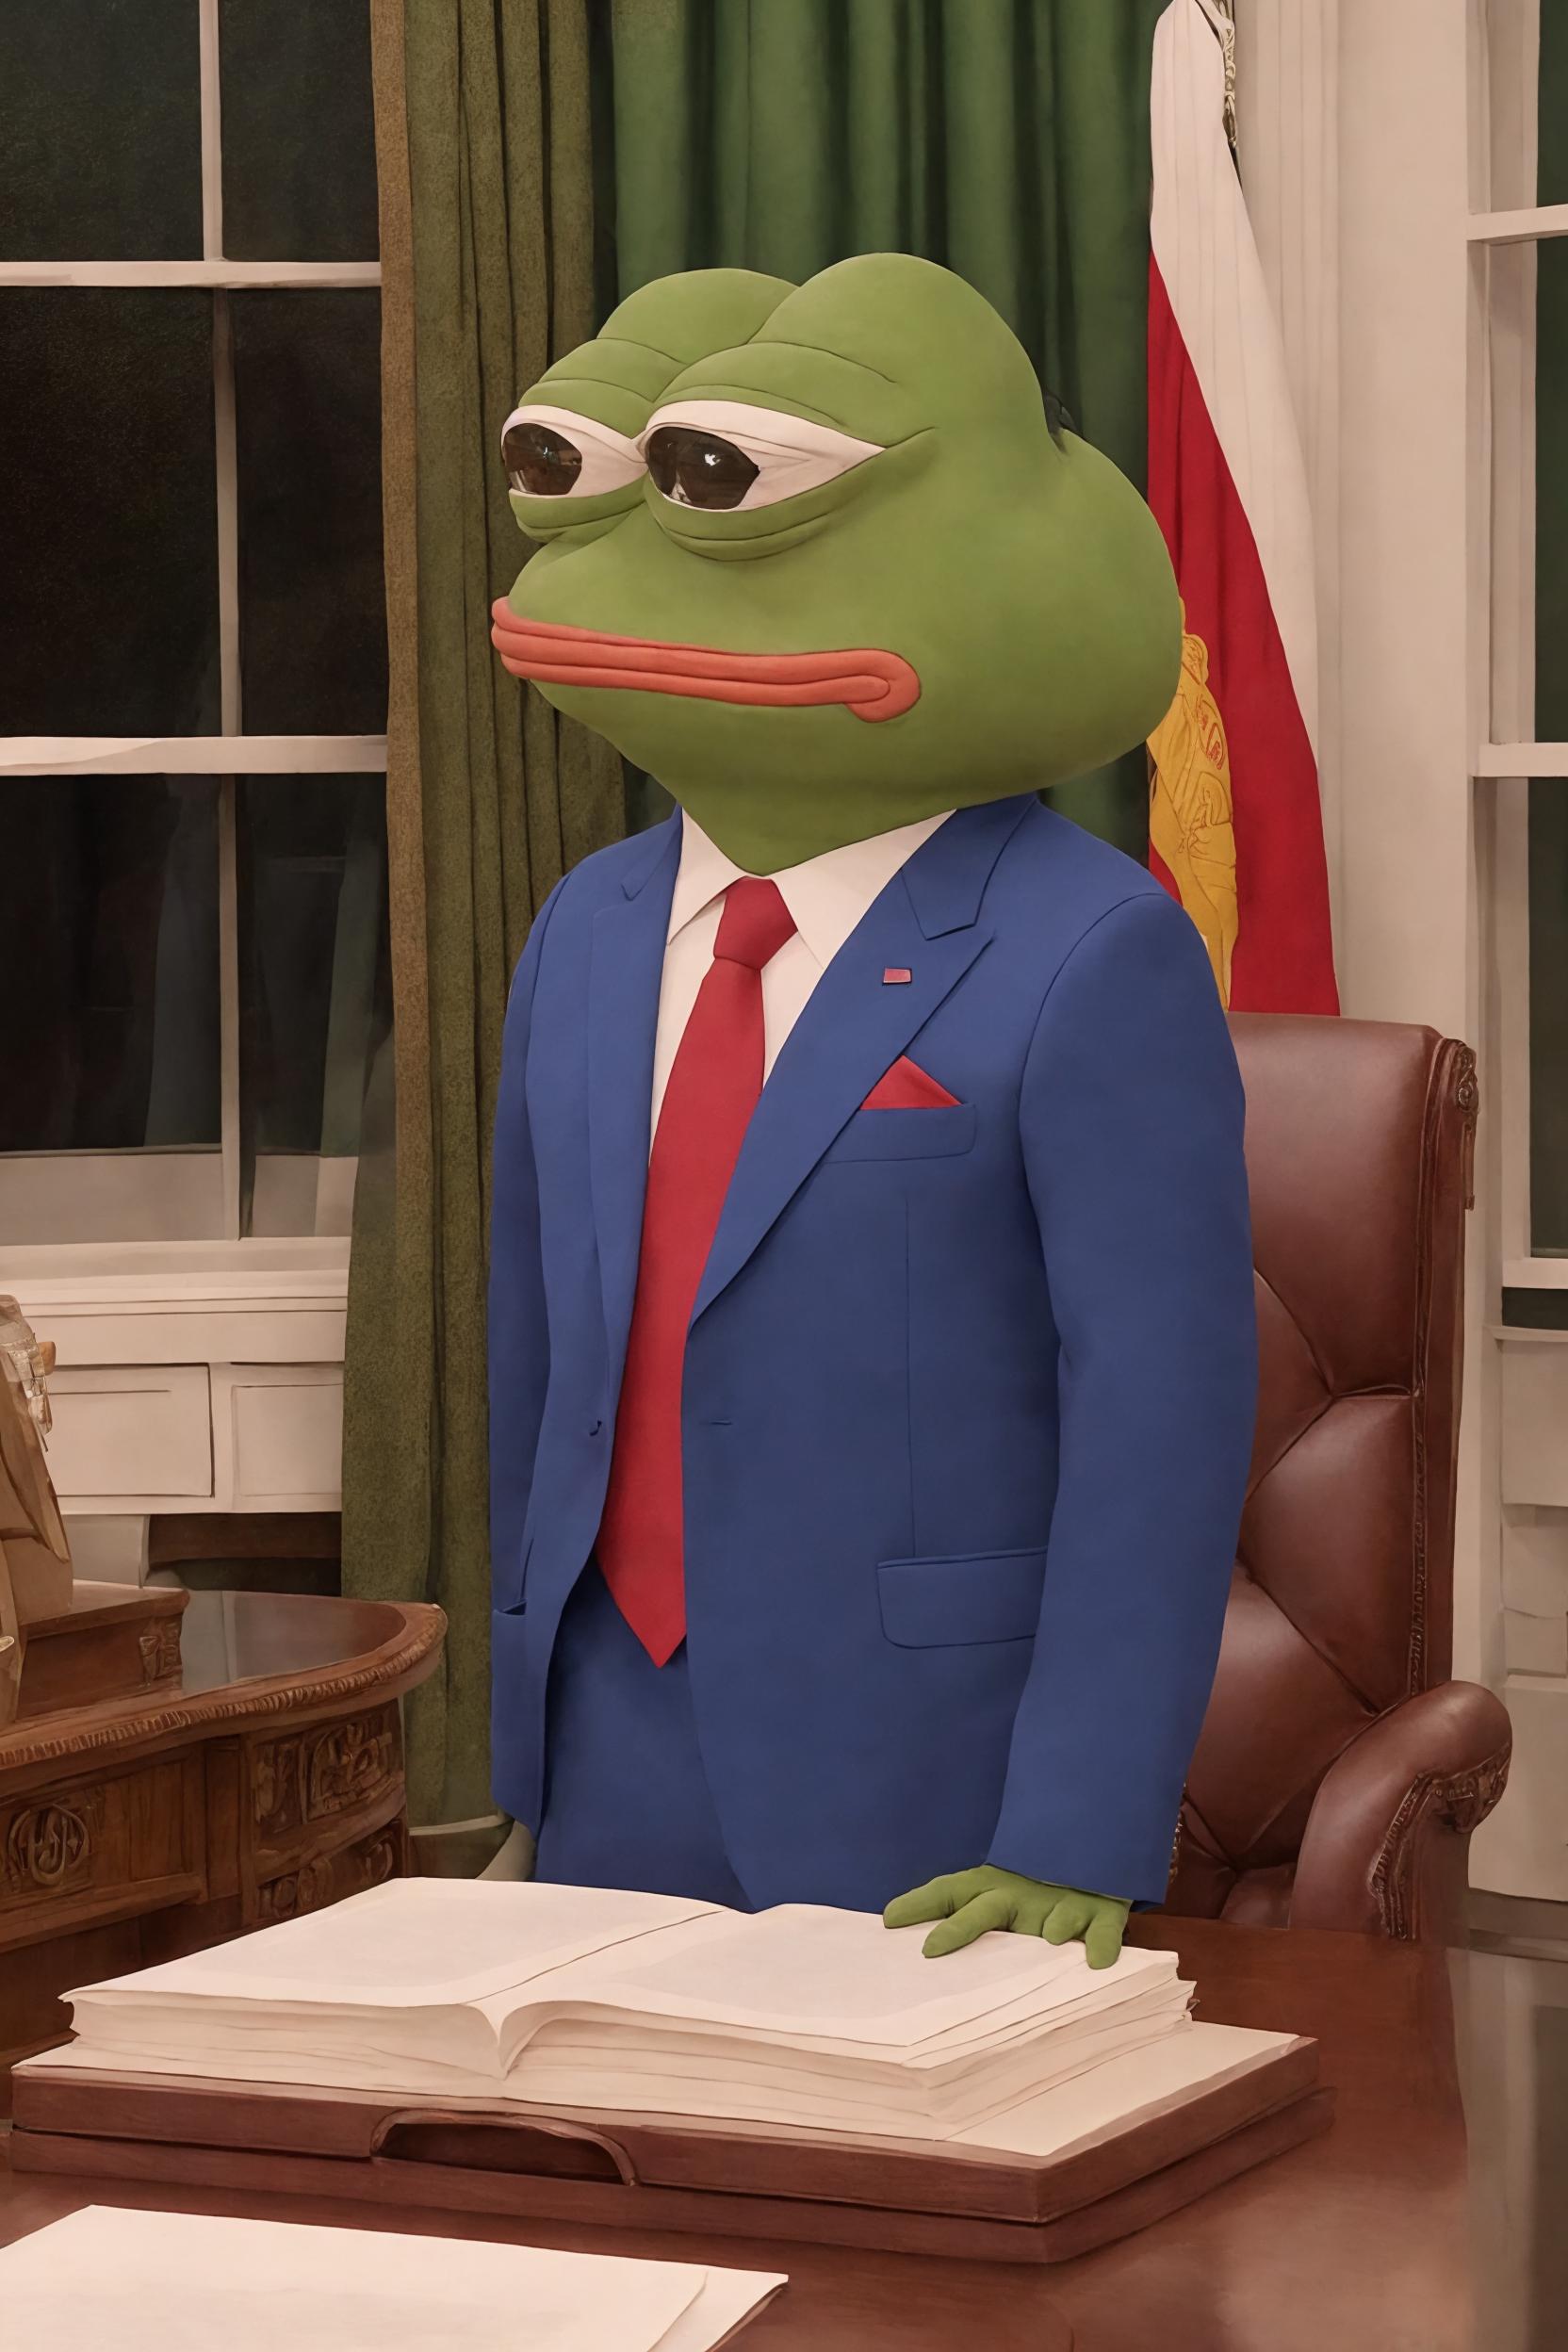 pepe_frog image by mikiew